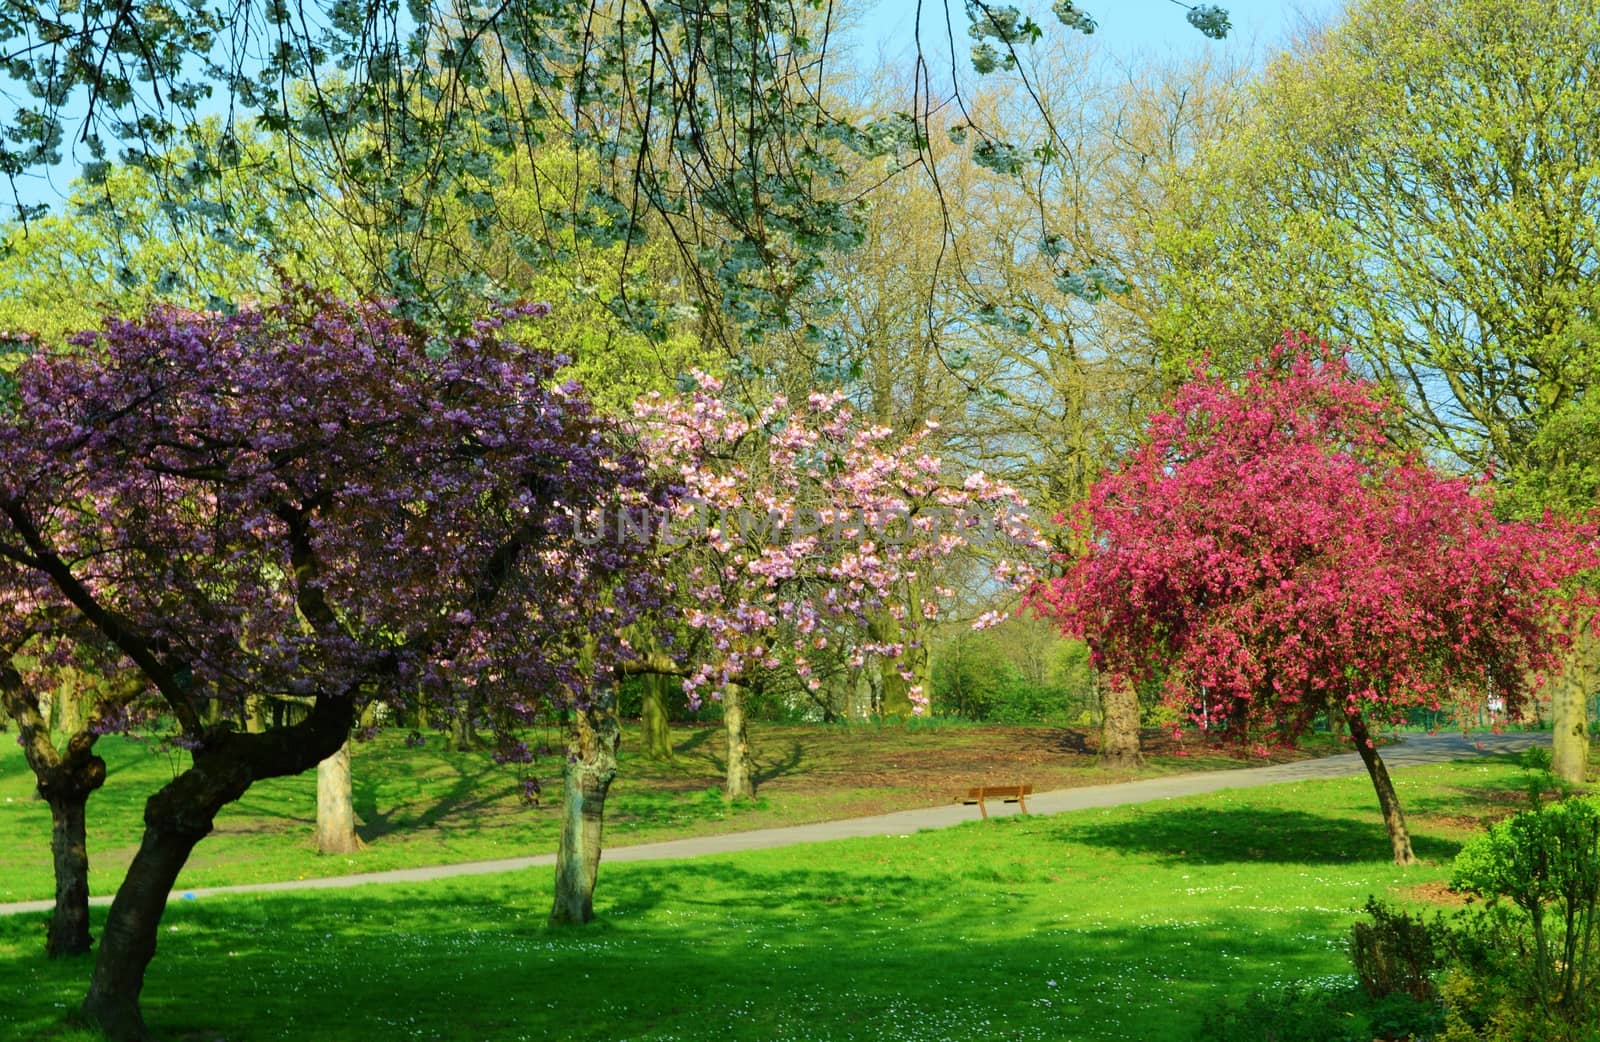 A colourful image of Spring photographed in an English Park.